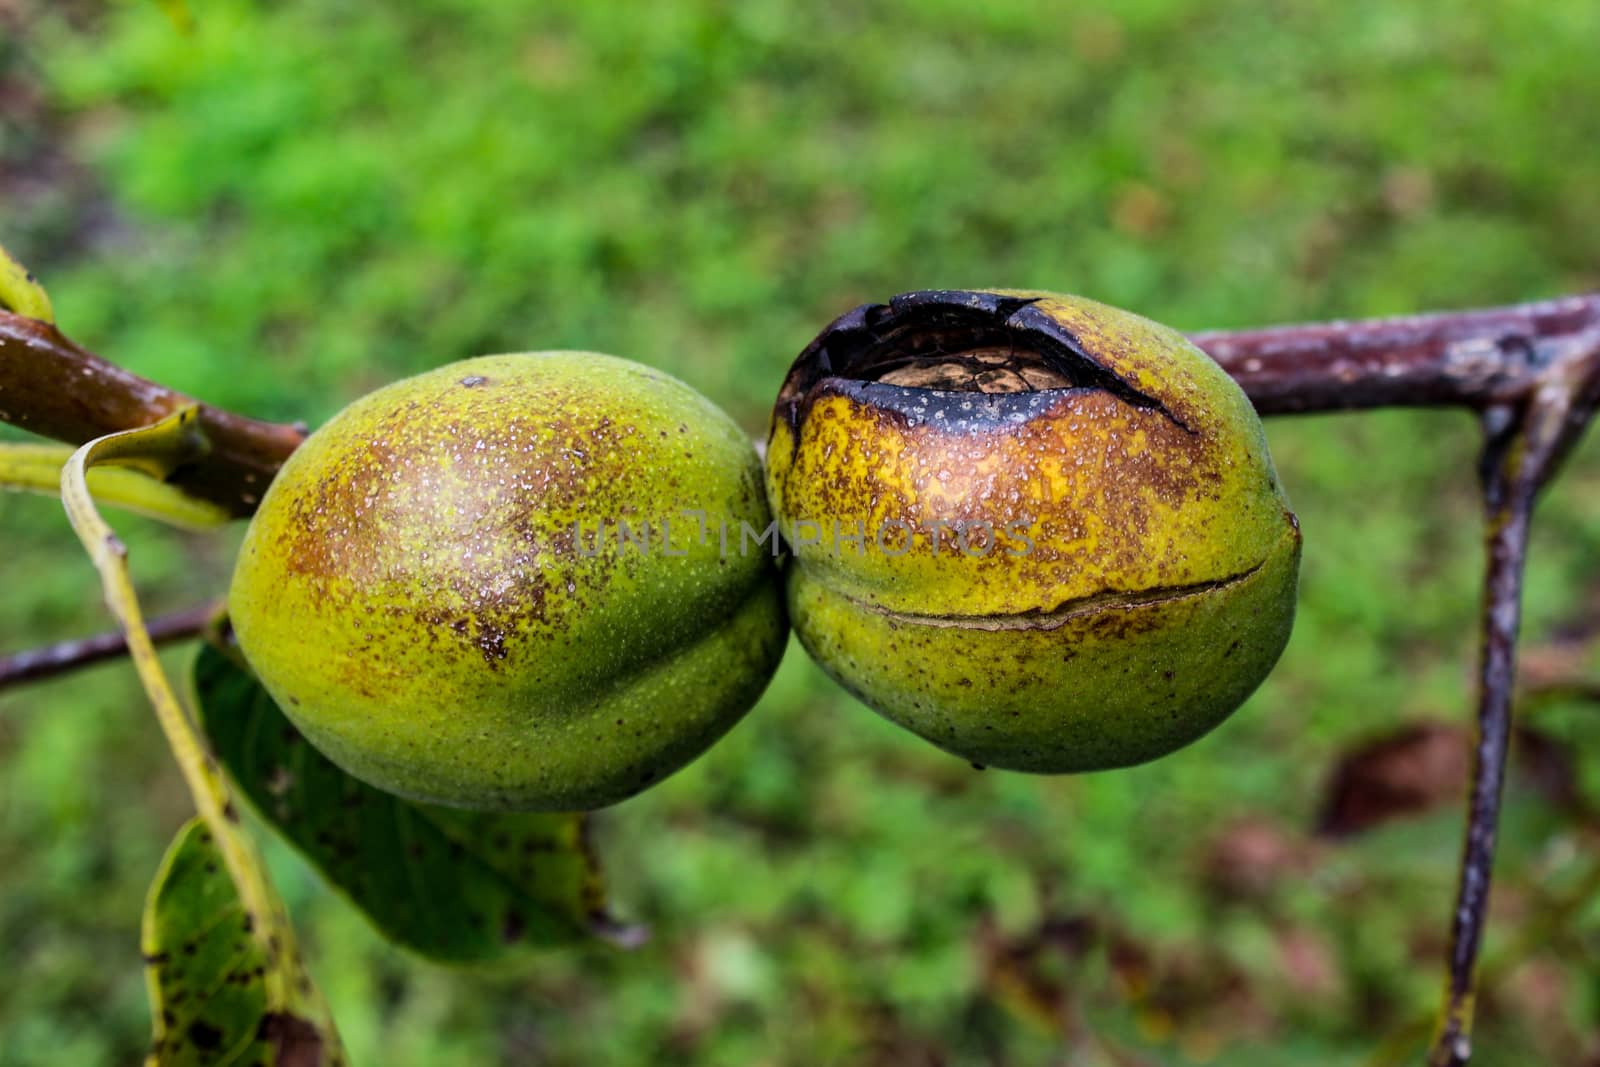 Two walnuts in green shells burned by the sun, one walnut cracked. by mahirrov